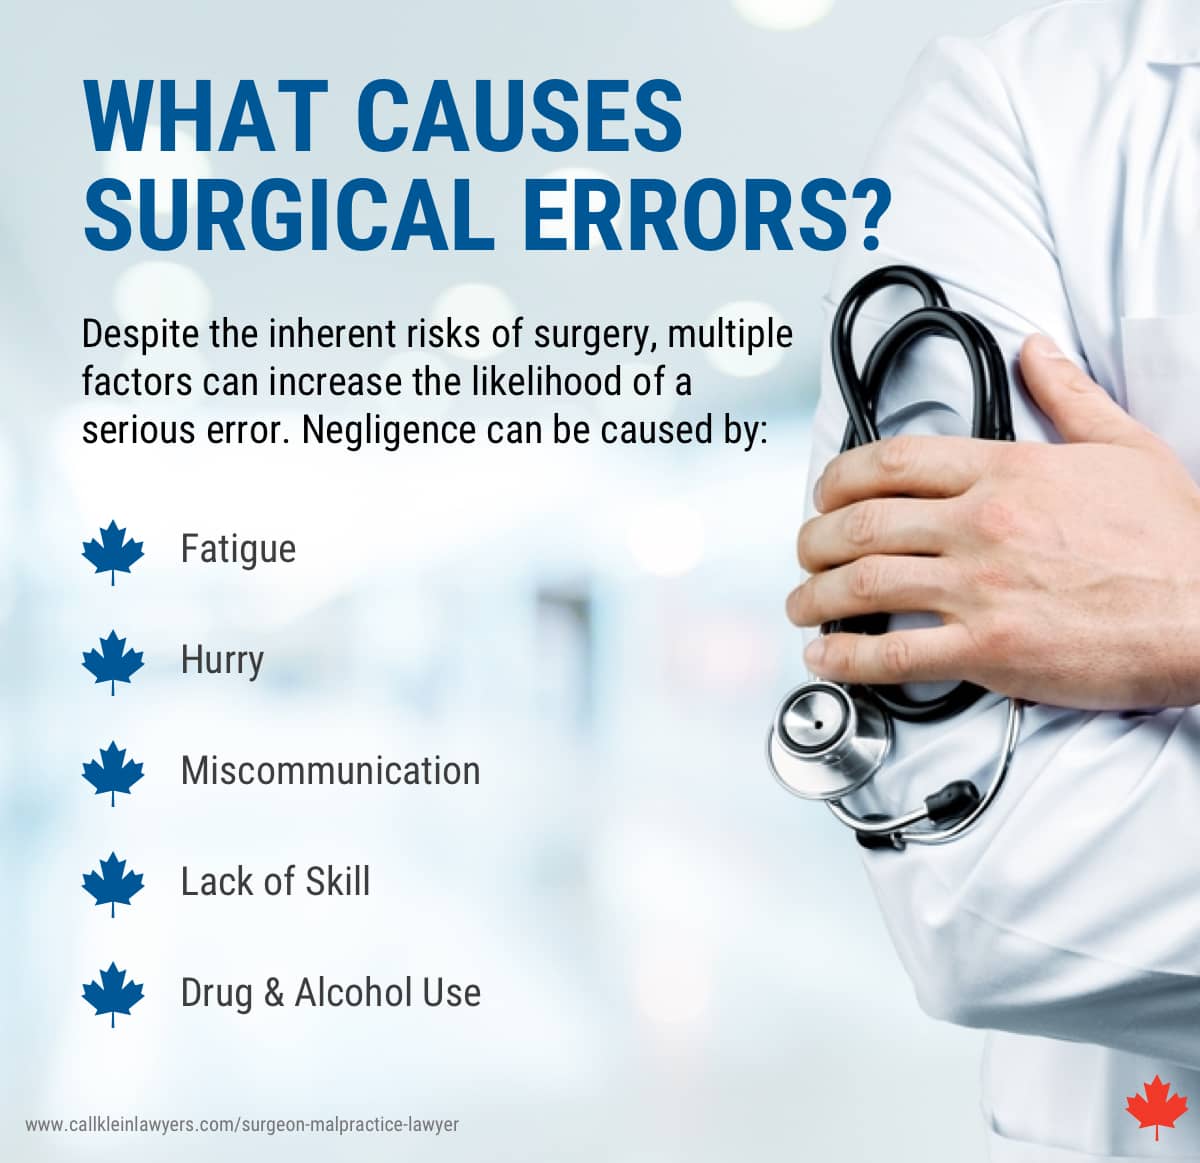 Top Causes of Surgical Errors | Klein Lawyers